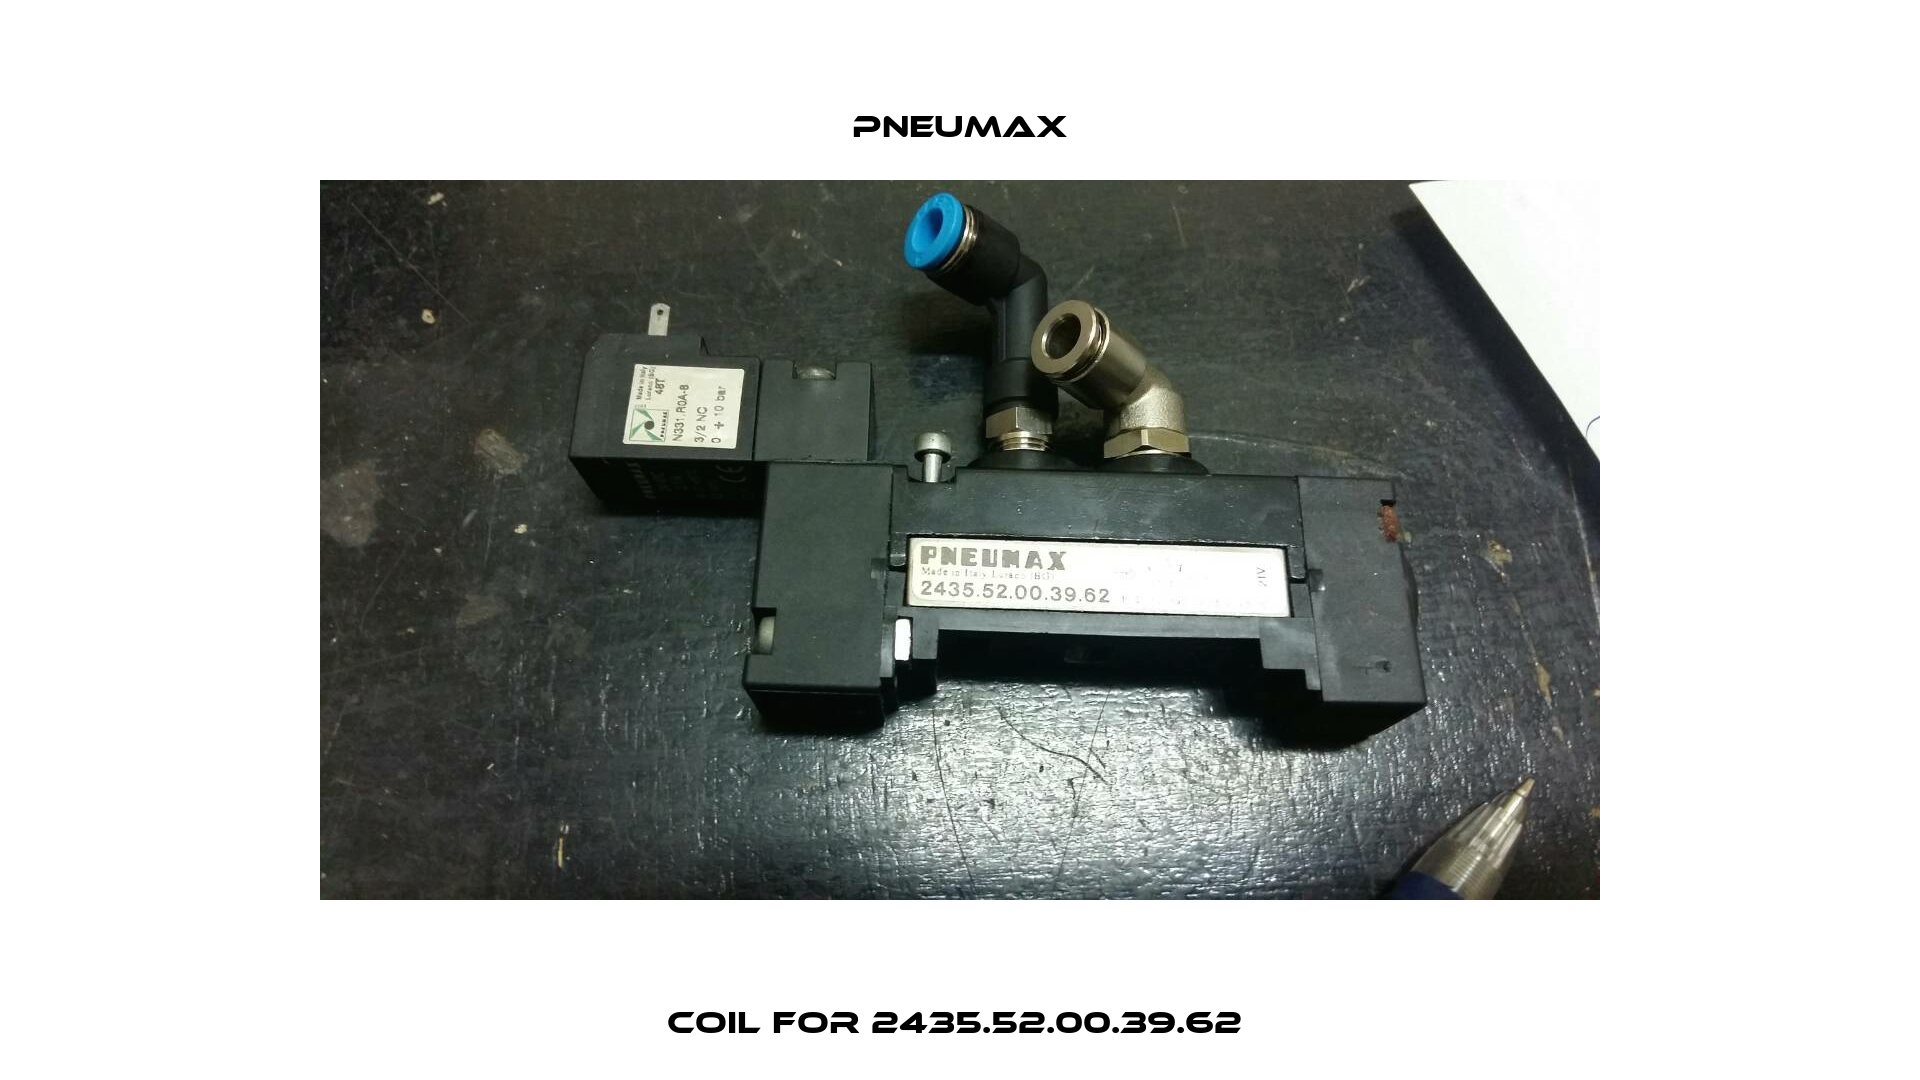 Coil for 2435.52.00.39.62  Pneumax